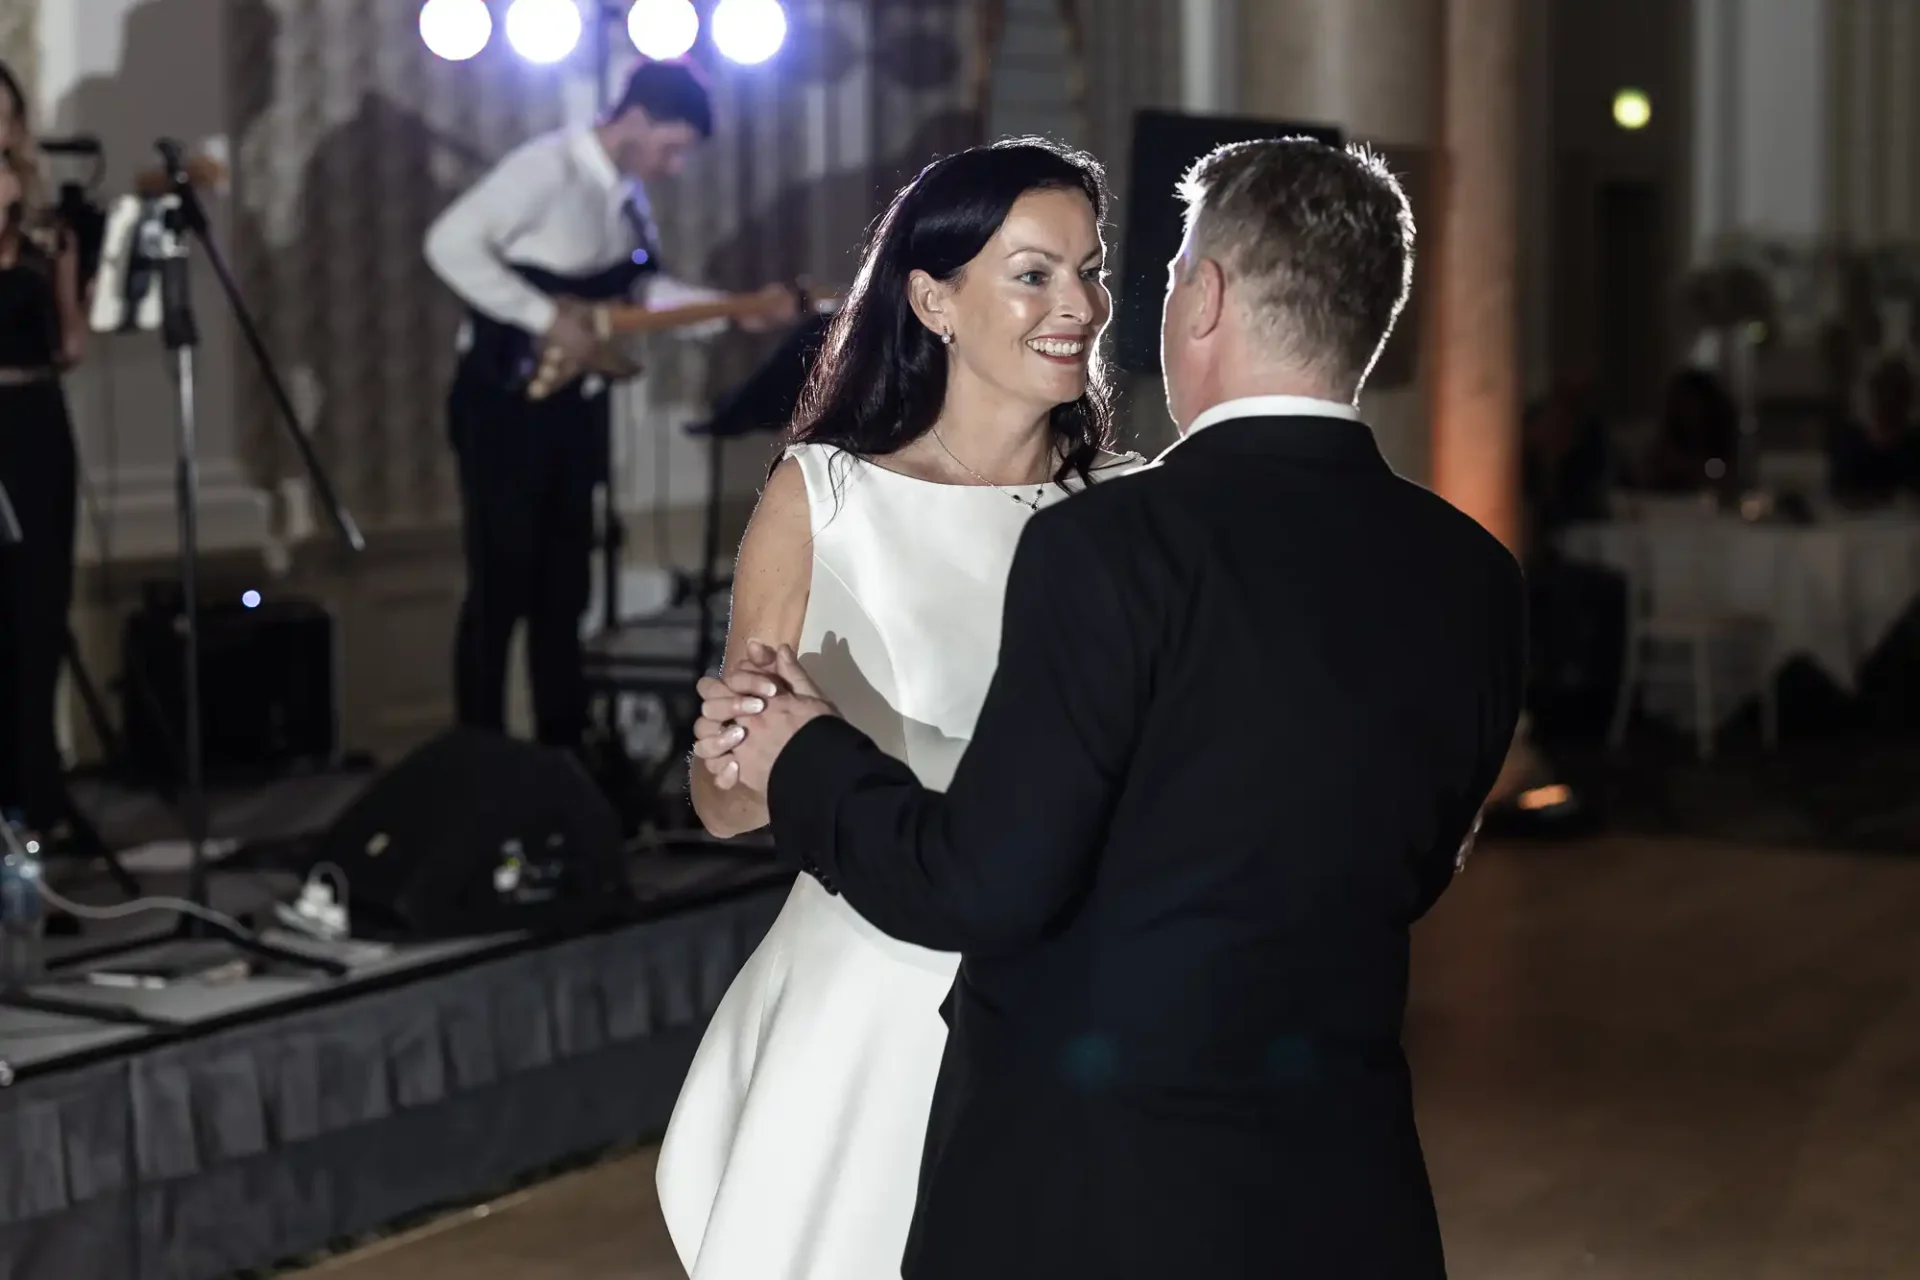 A couple in formal attire smiling at each other while dancing at an event, with a band performing in the background.